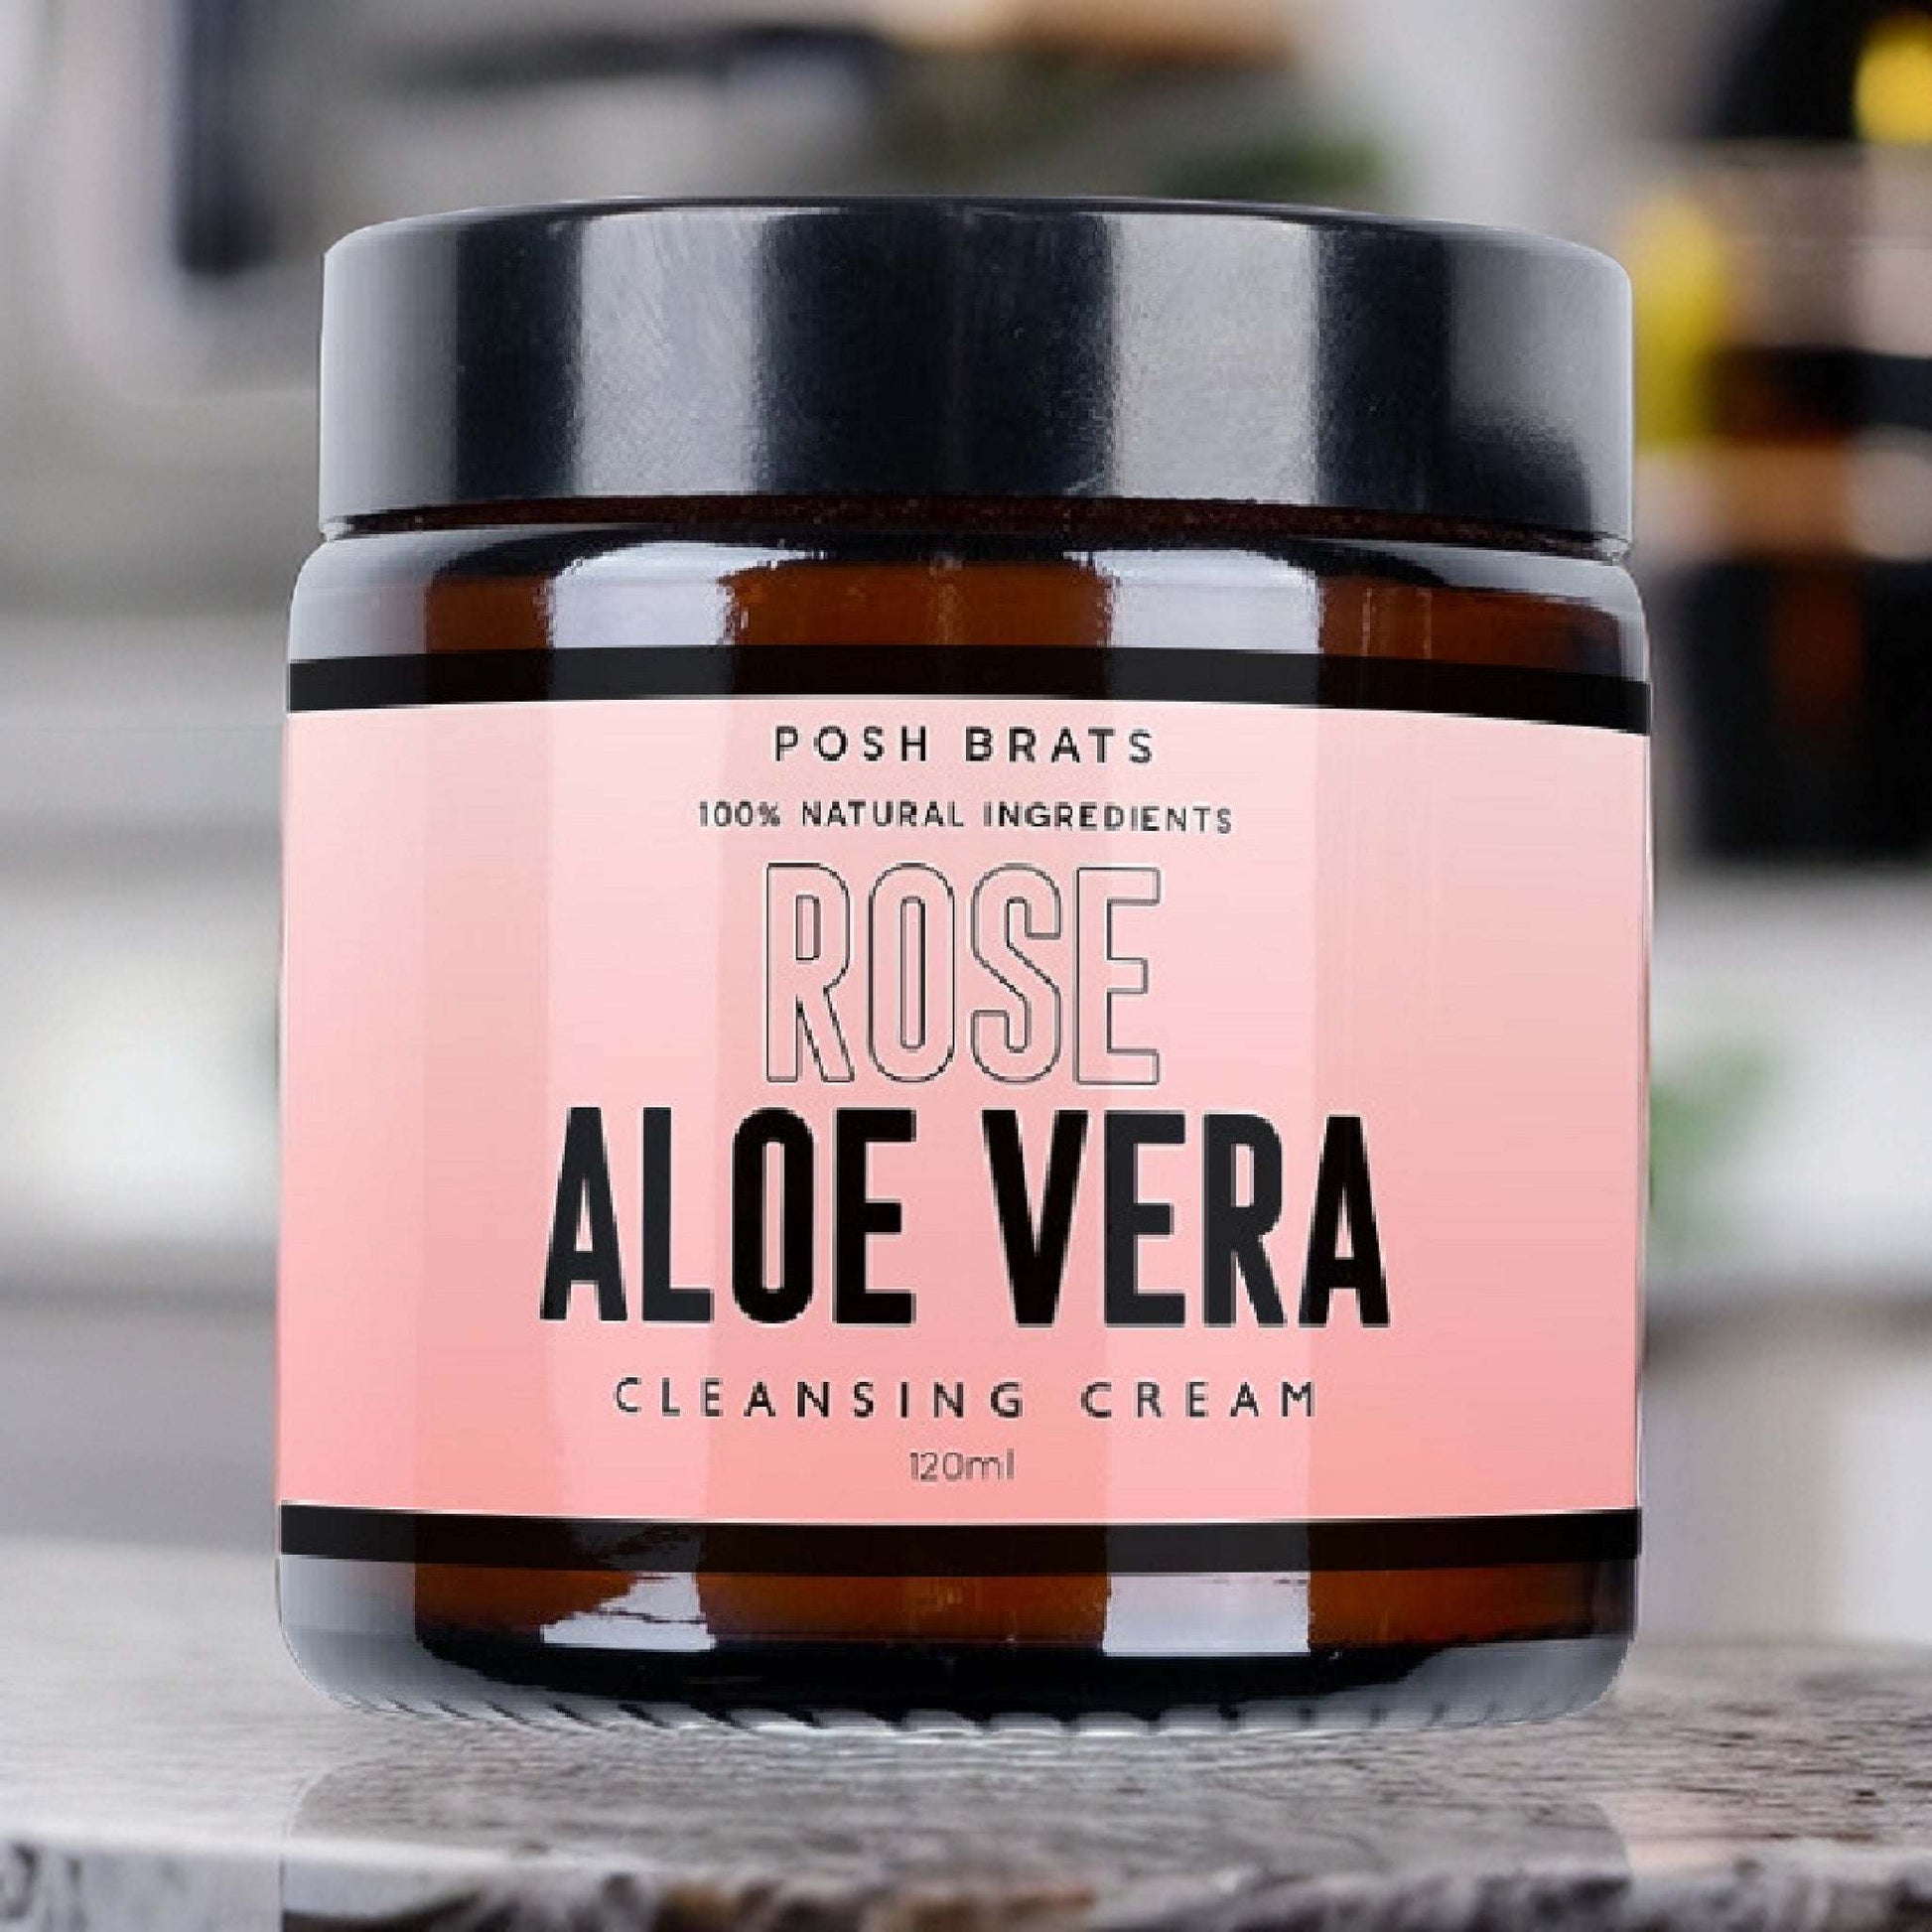 Get a refreshing cleanse with our Rose Cold Cream. Uncover the secret to radiant skin now!